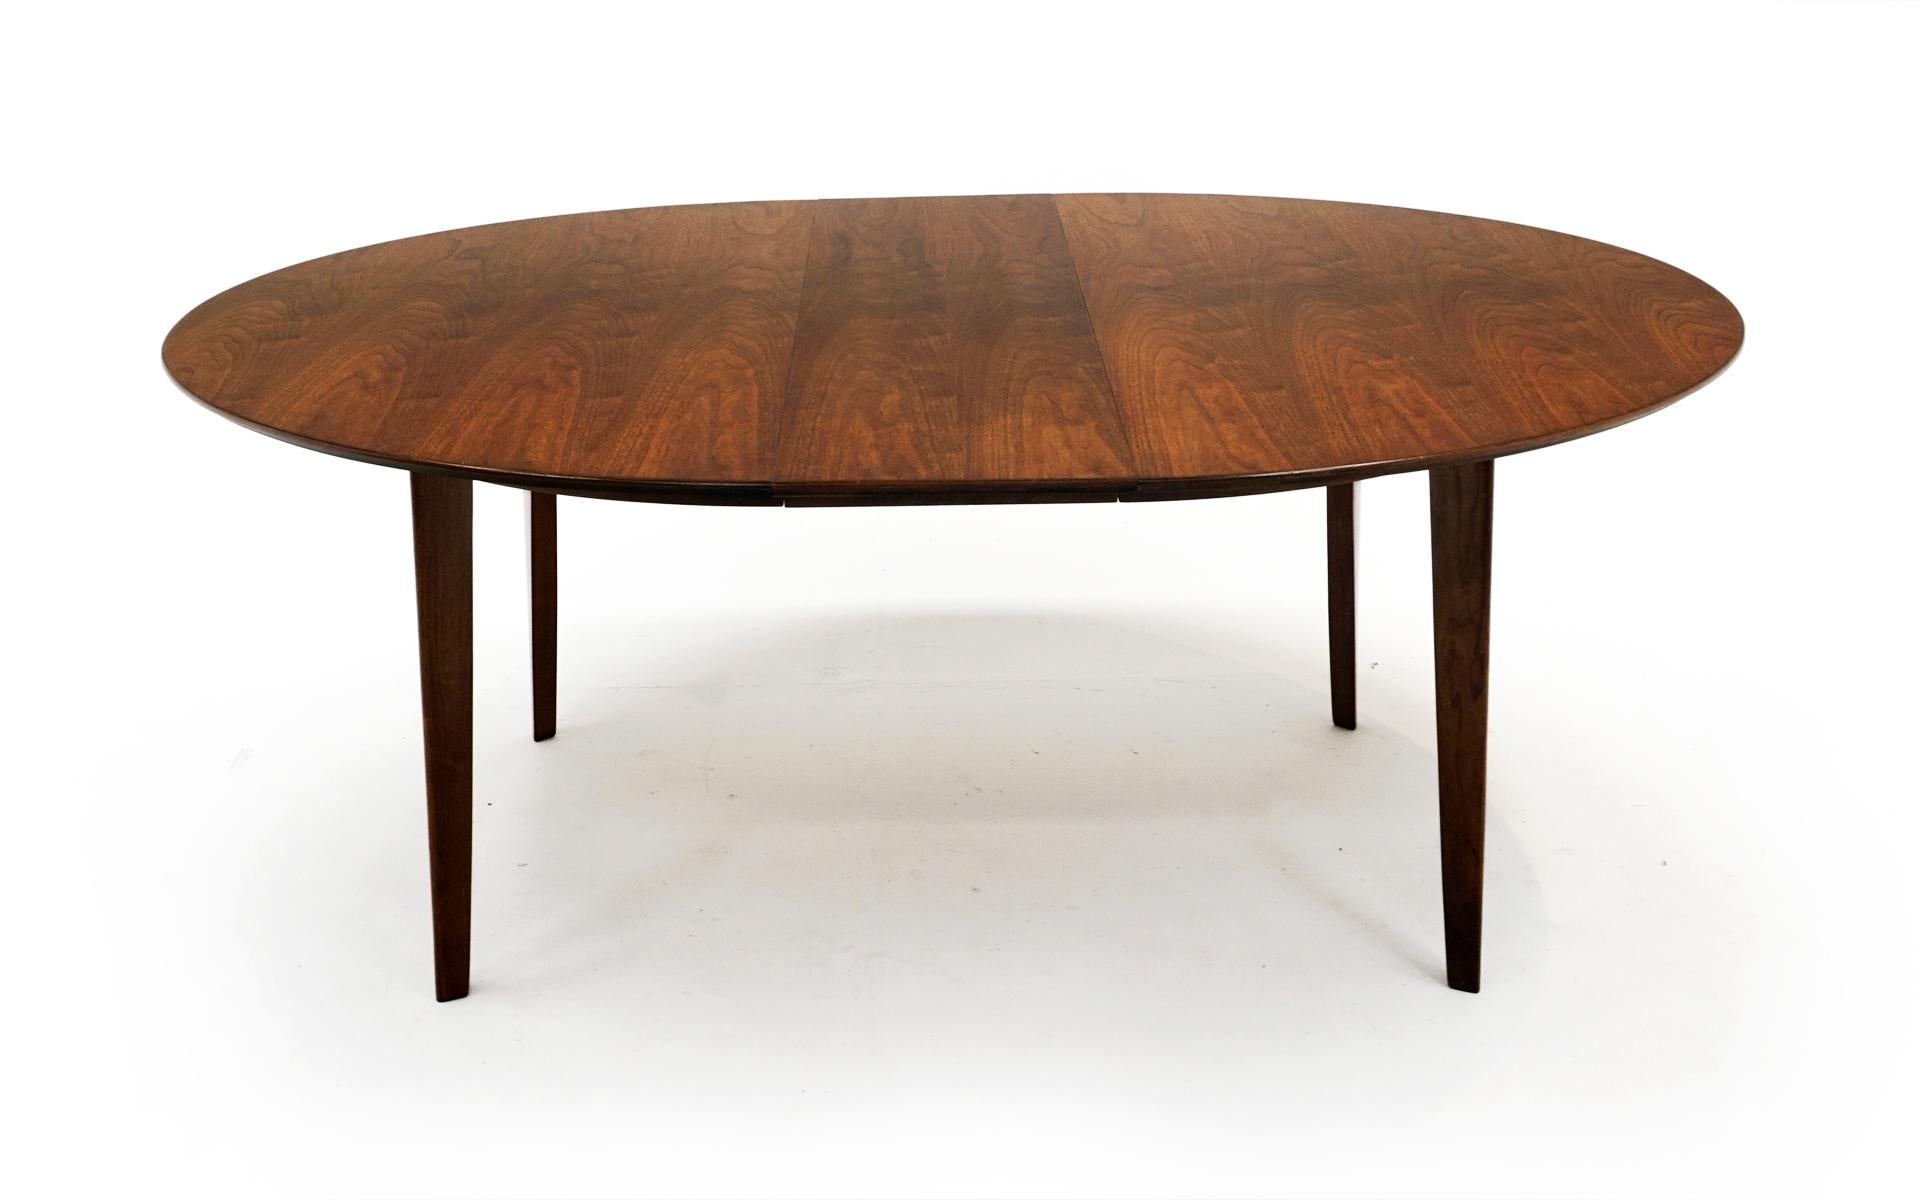 American Expandable Dining Table by Edward Wormley for Dunbar, Almost Round to Oval